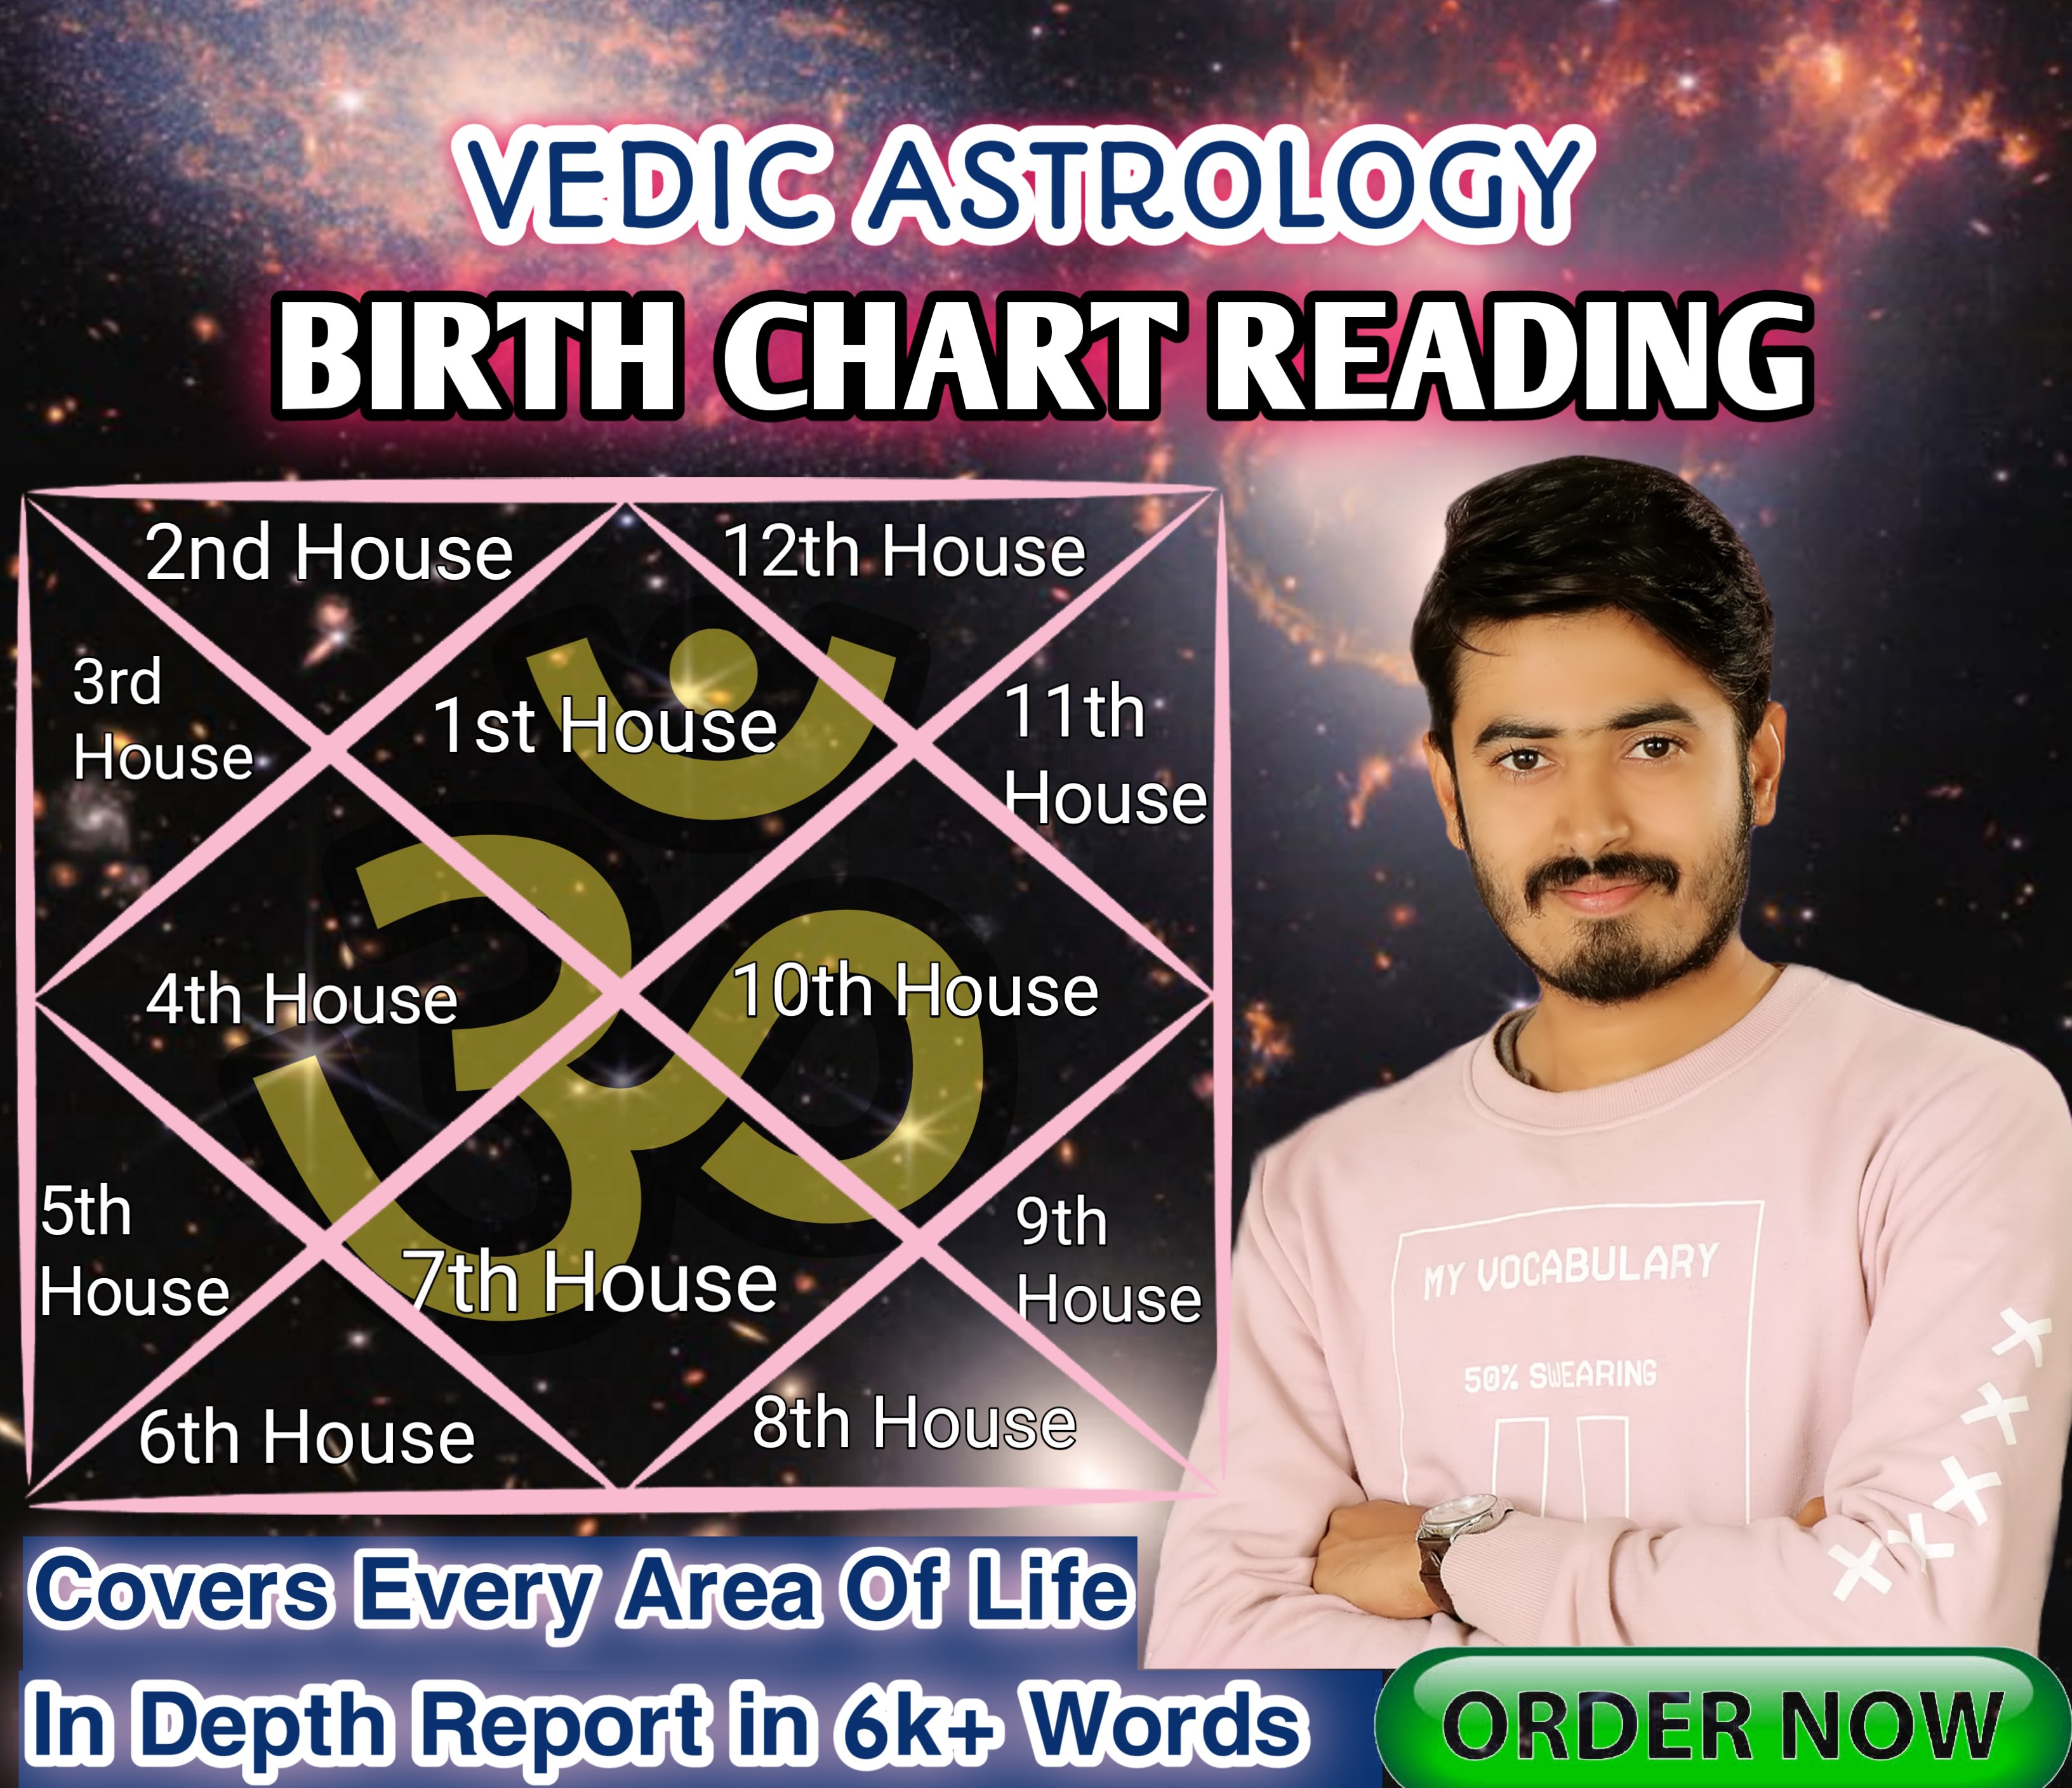 The Single Most Important Thing You Need To Know About Your Astrology Language